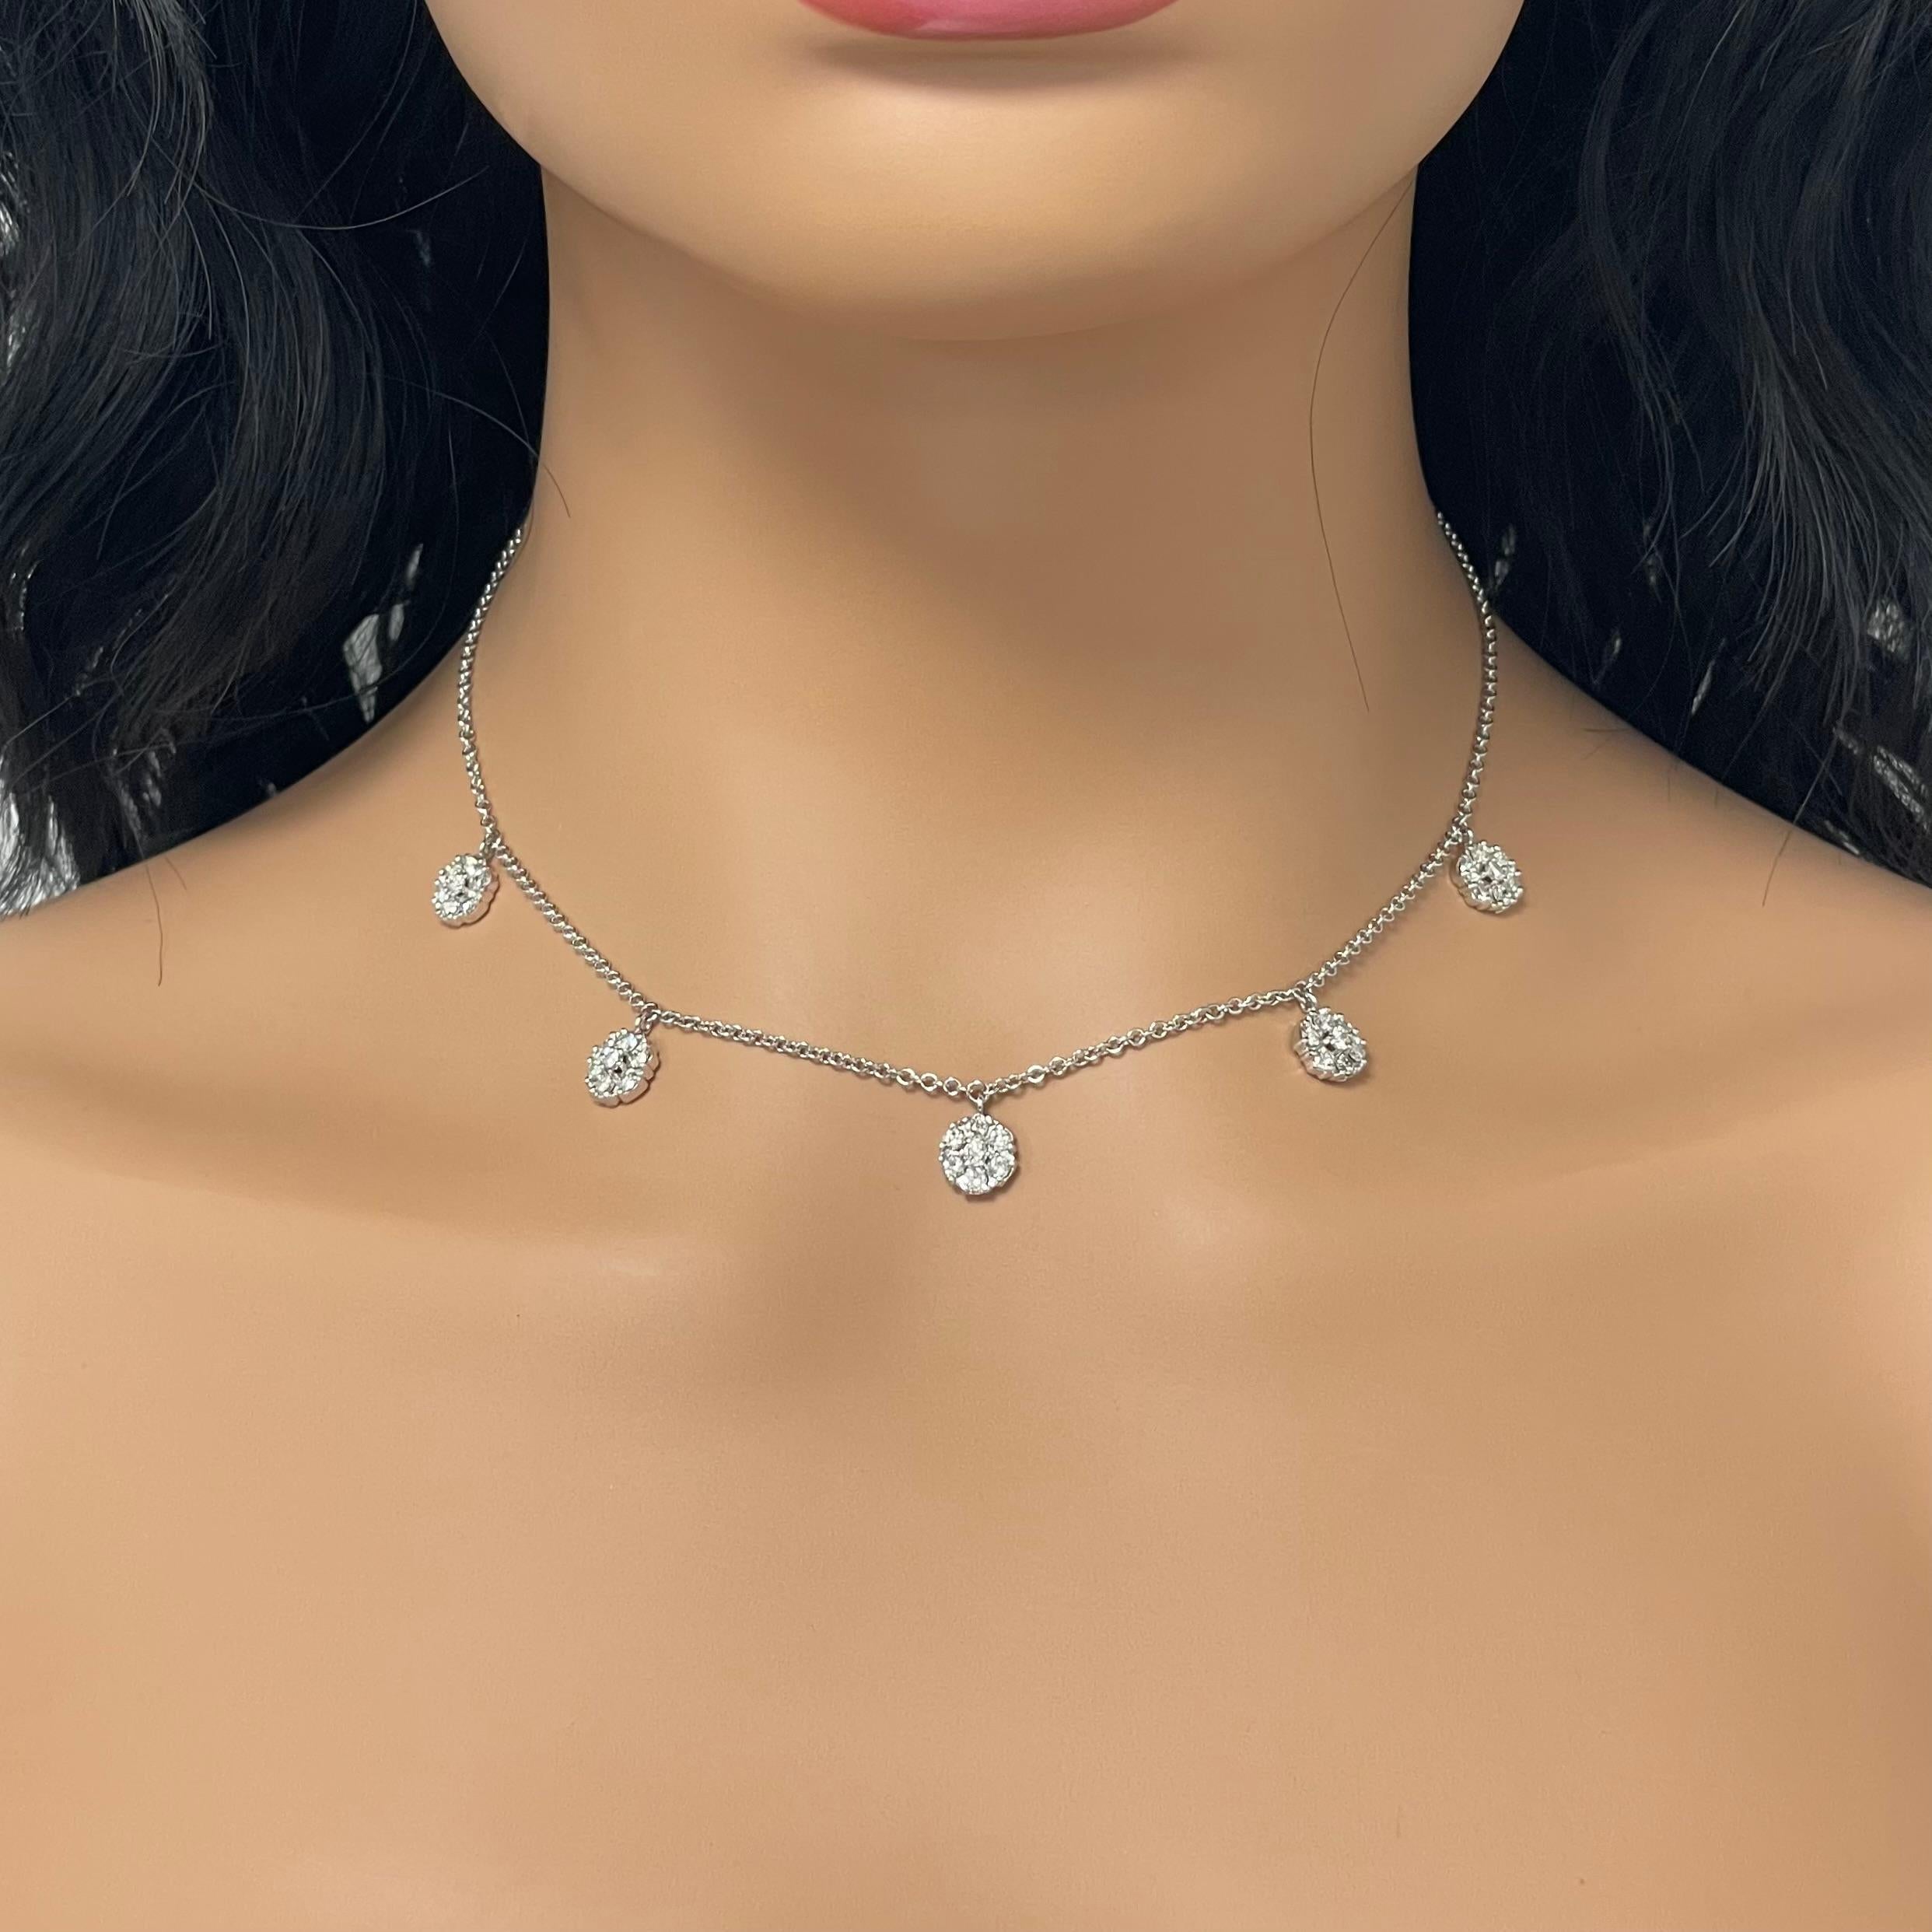 Fun & Chic this necklace is full of life and character. It is great of daily stylish wear or an evening out. It can also be layered with other pieces and jazzed up. 

Total Diamond Weight: 2.00 ct 
Diamond Color: I
Diamond Clarity: VS - SI (Very